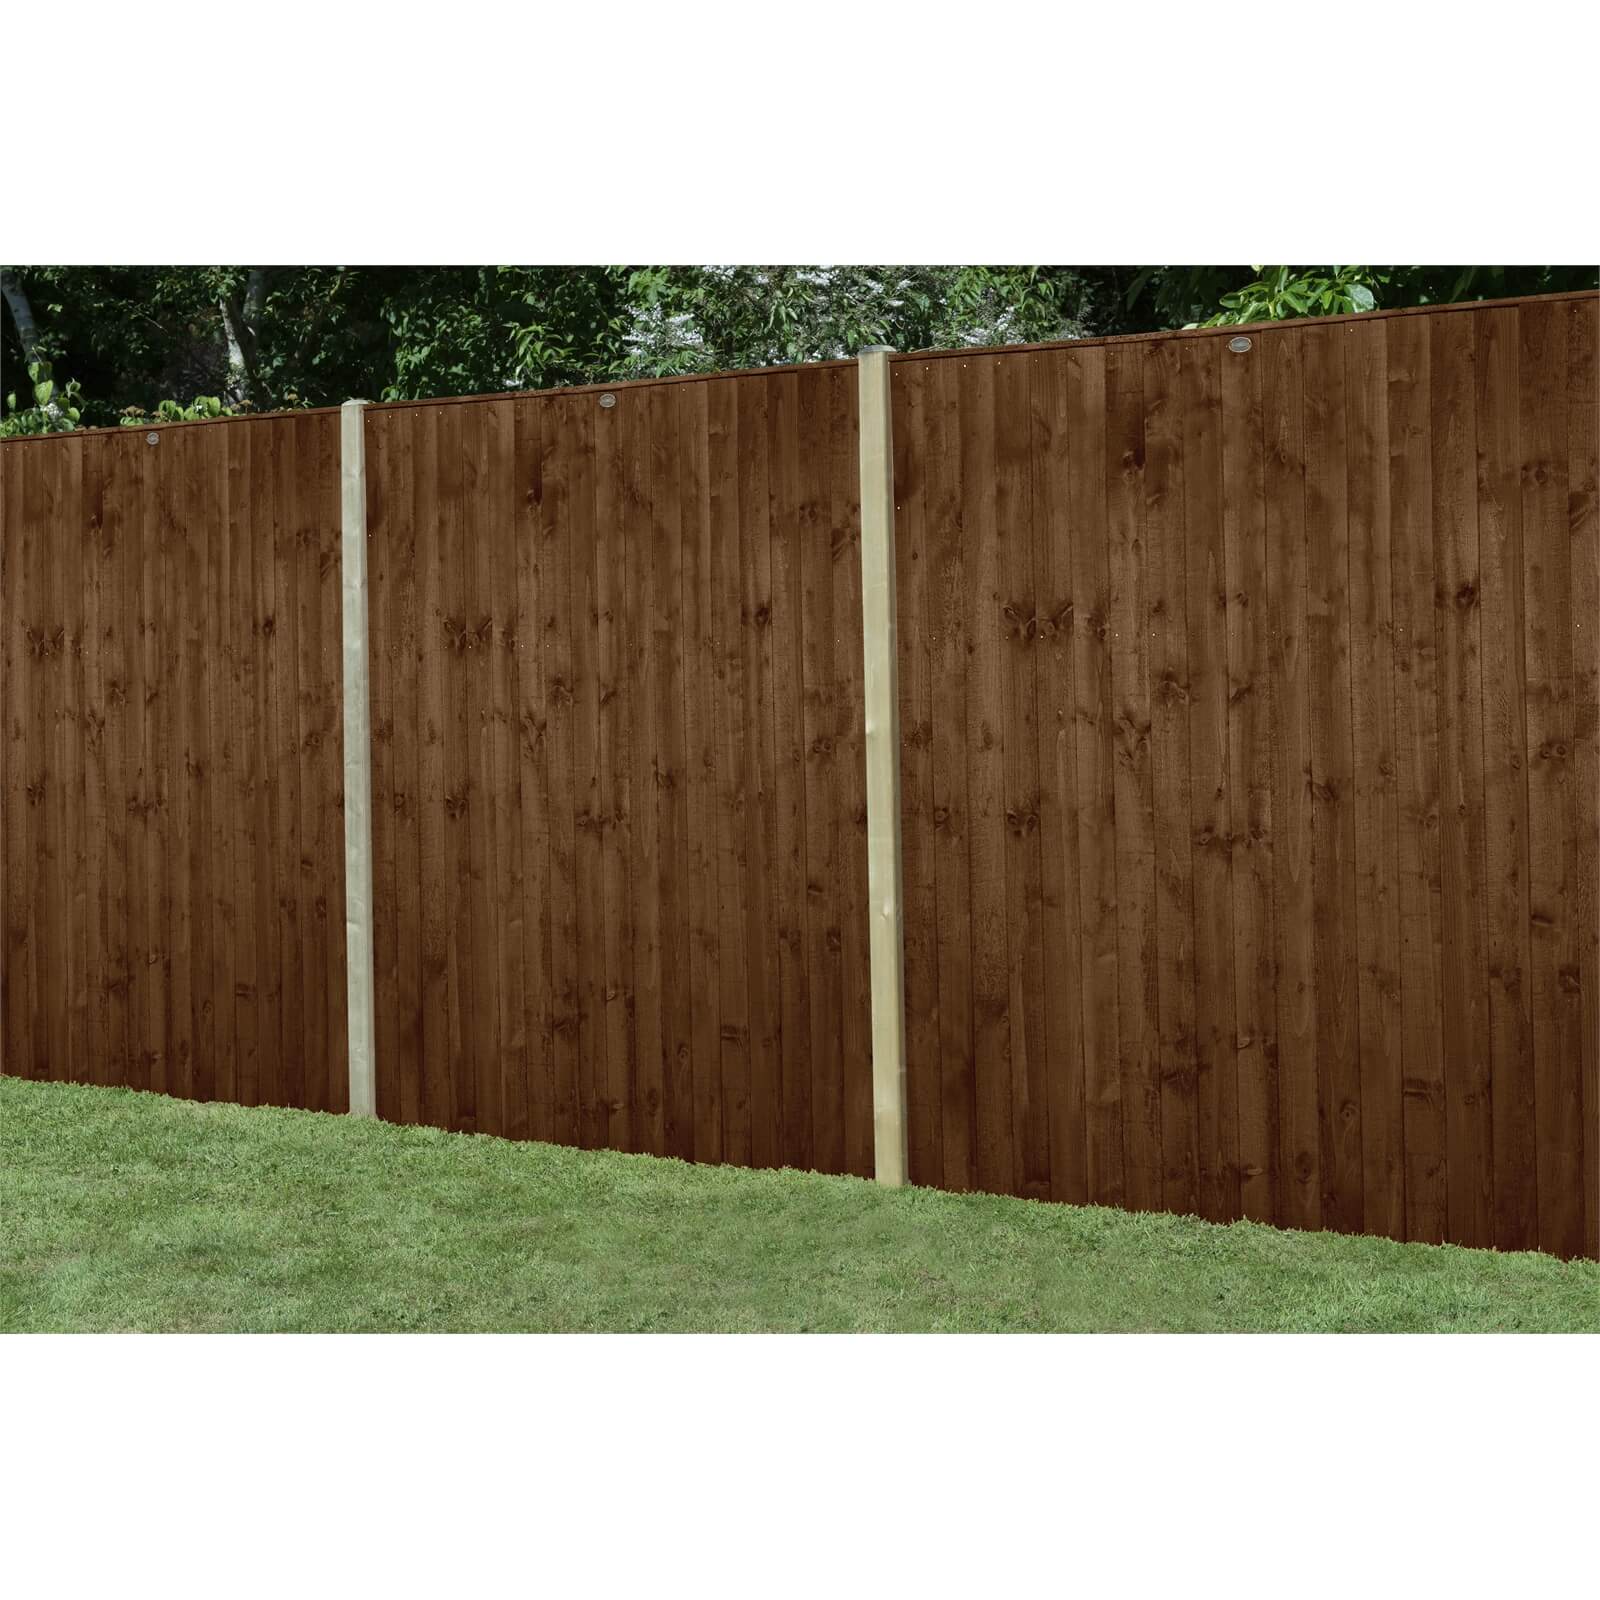 6ft x 6ft (1.83m x 1.85m) Pressure Treated Featheredge Fence Panel (Dark Brown) - Pack of 5